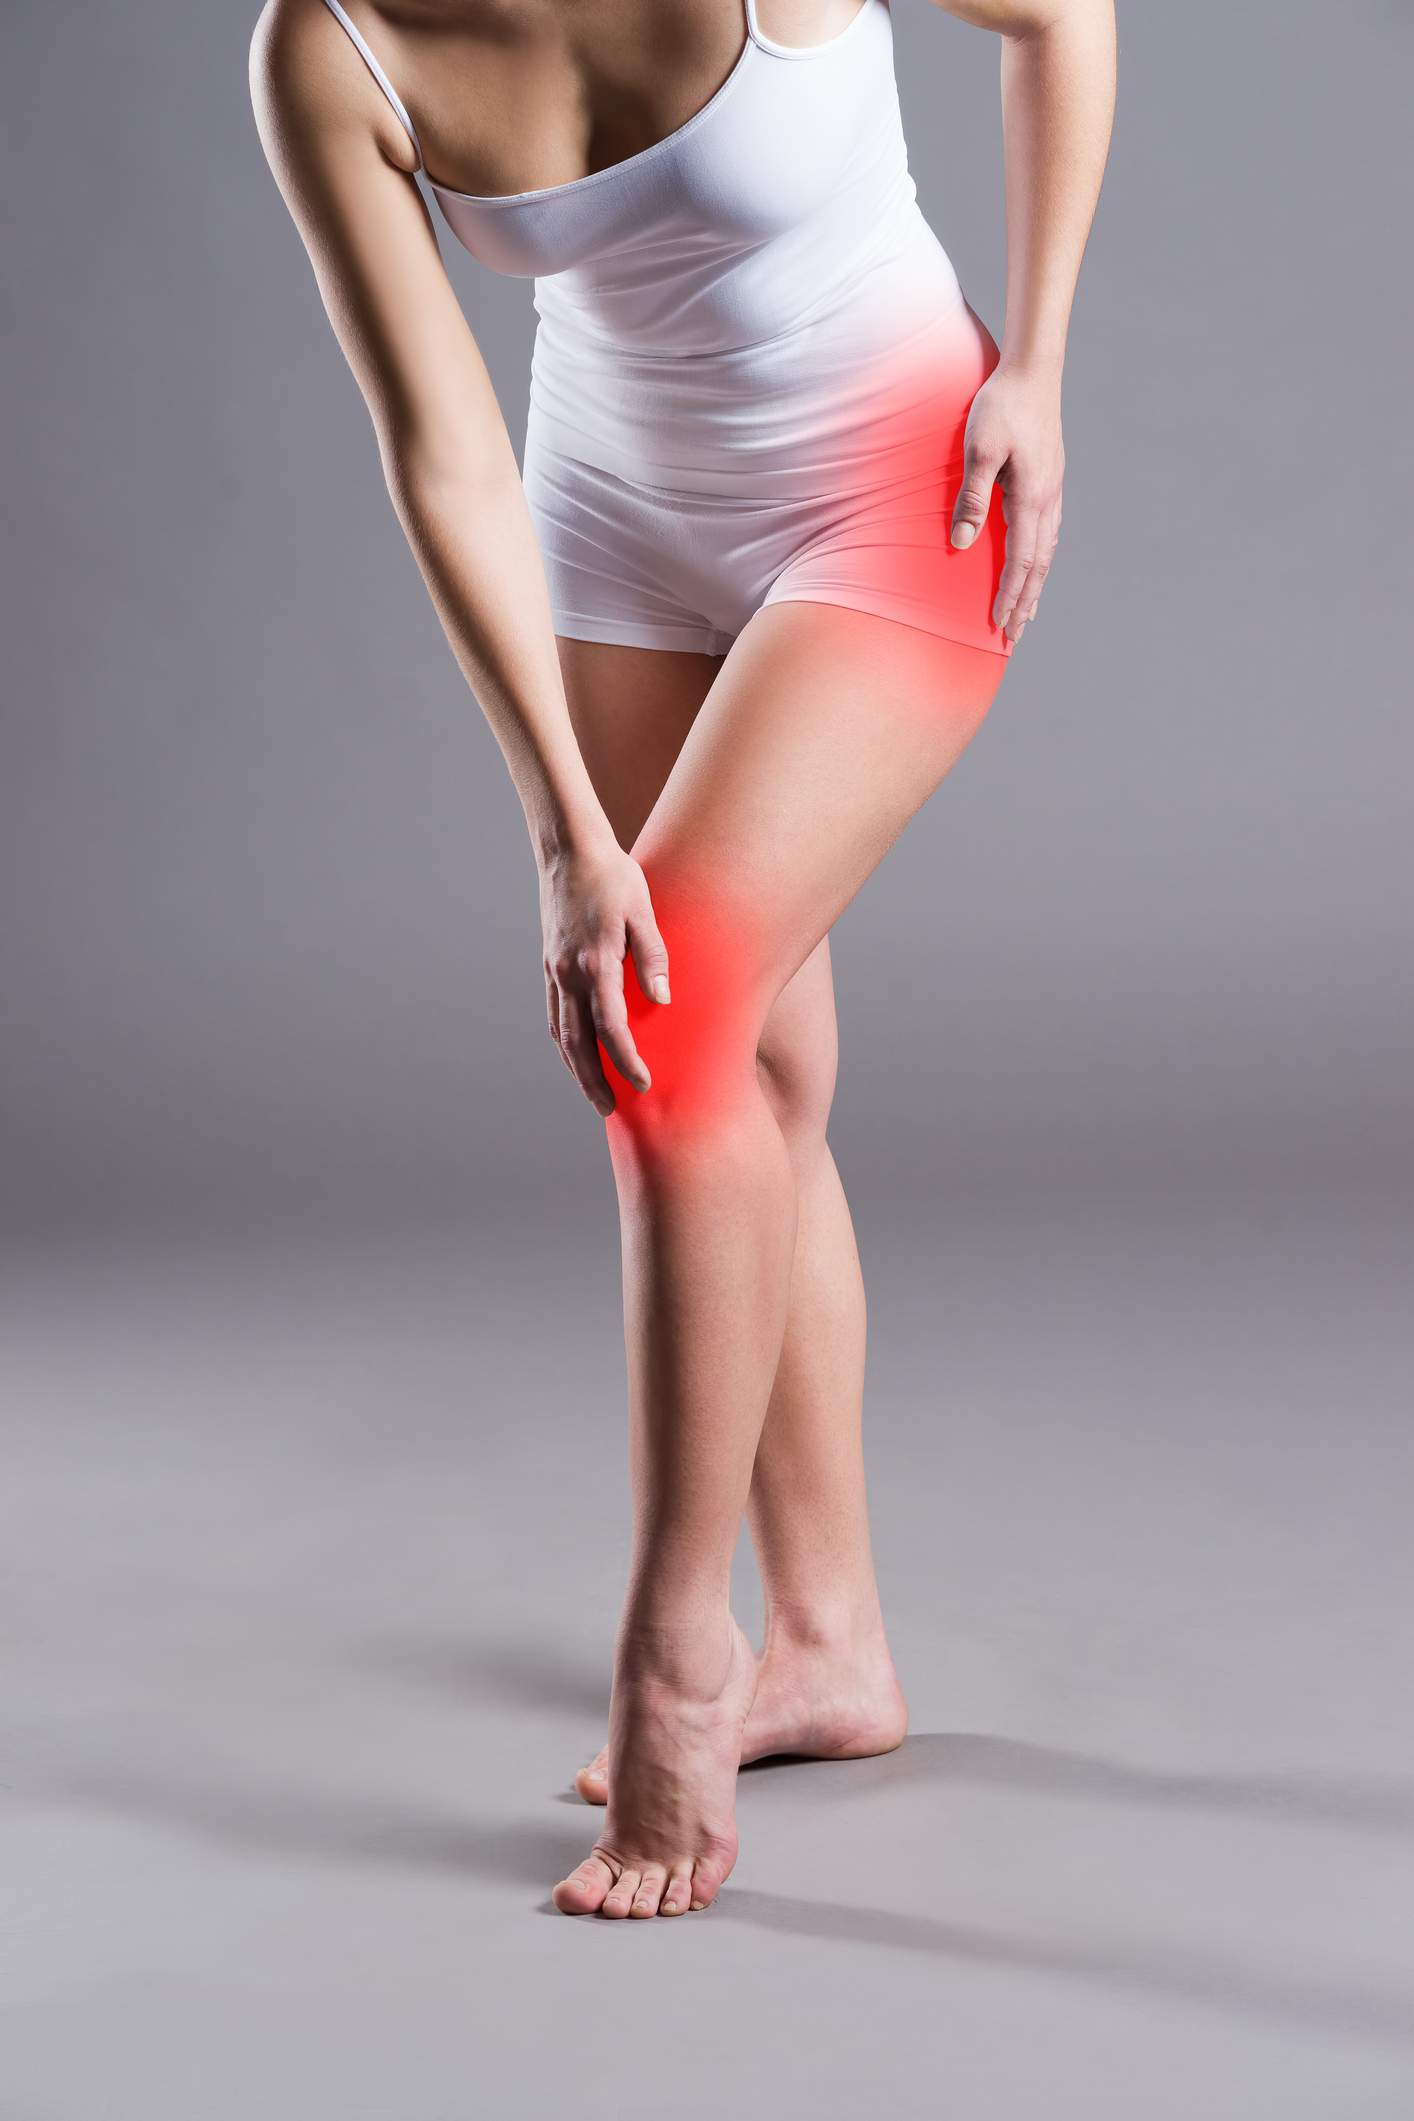 Hip and knee pain